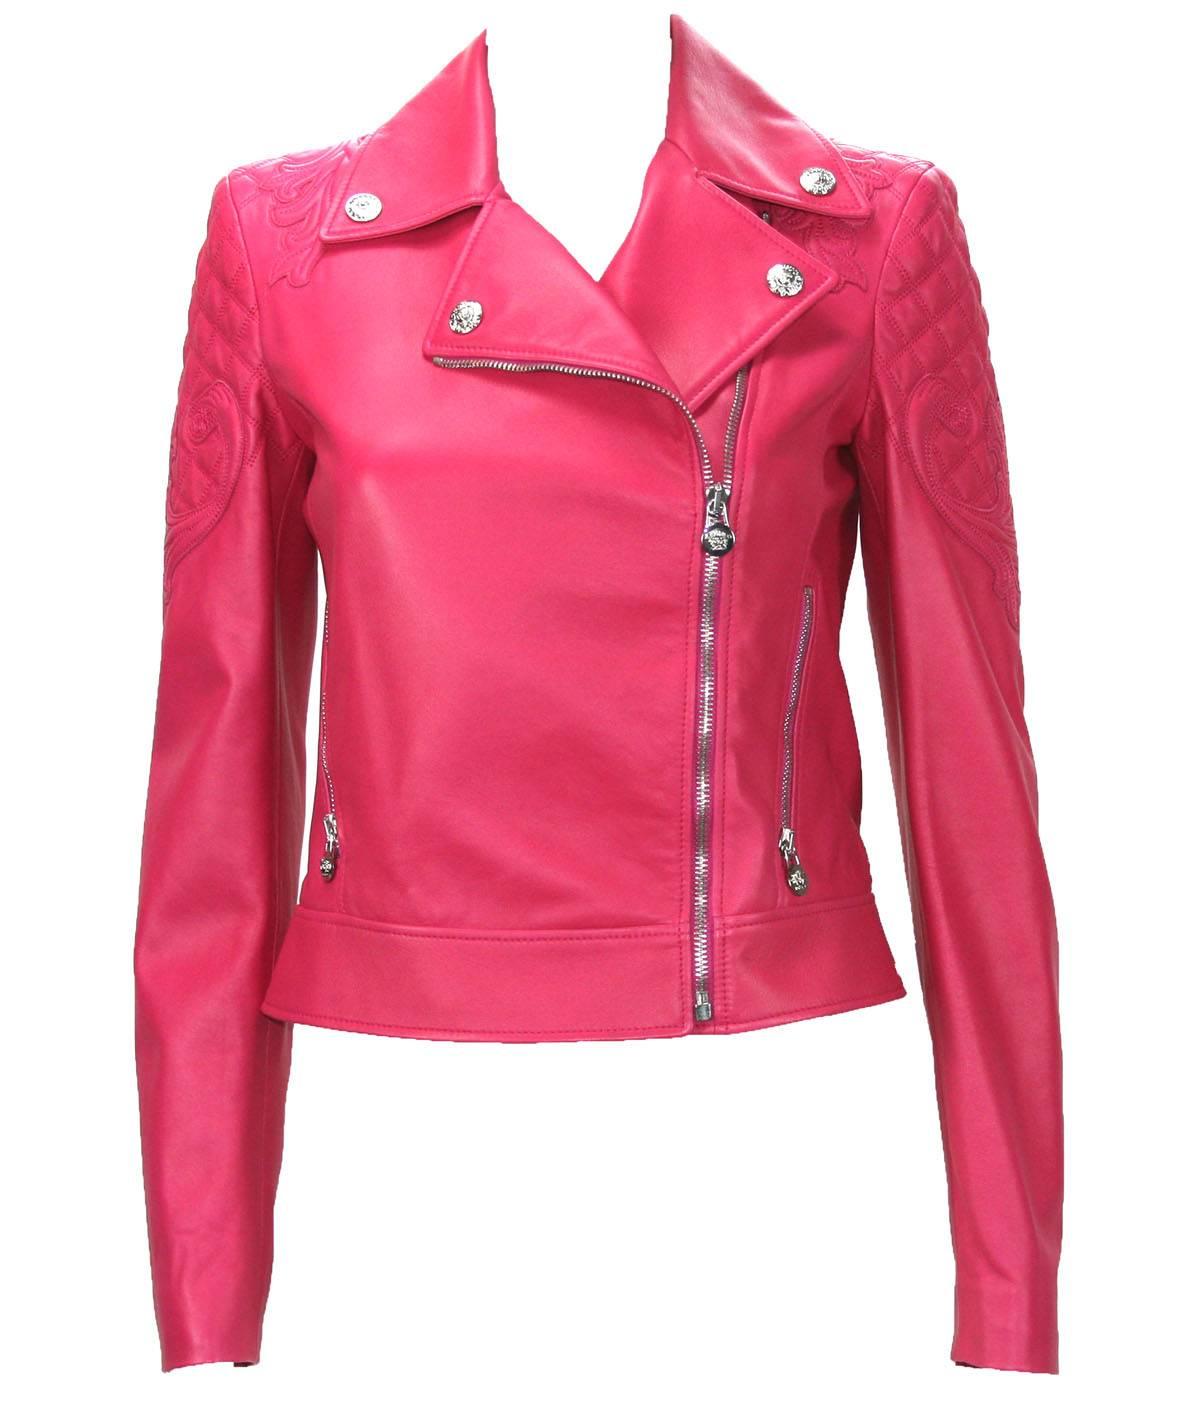 New Sexy and Hot VERSACE Vanitas Barocco Leather Moto Jacket
Italian Size - 38
Color - Hot Pink
100% Soft Leather, Quilted Swirl Design, Front Zipper Closure, Two Side Zip Pockets.
Fully Lined in Designer Logo Fabric, VERSACE Silver Tone Metal